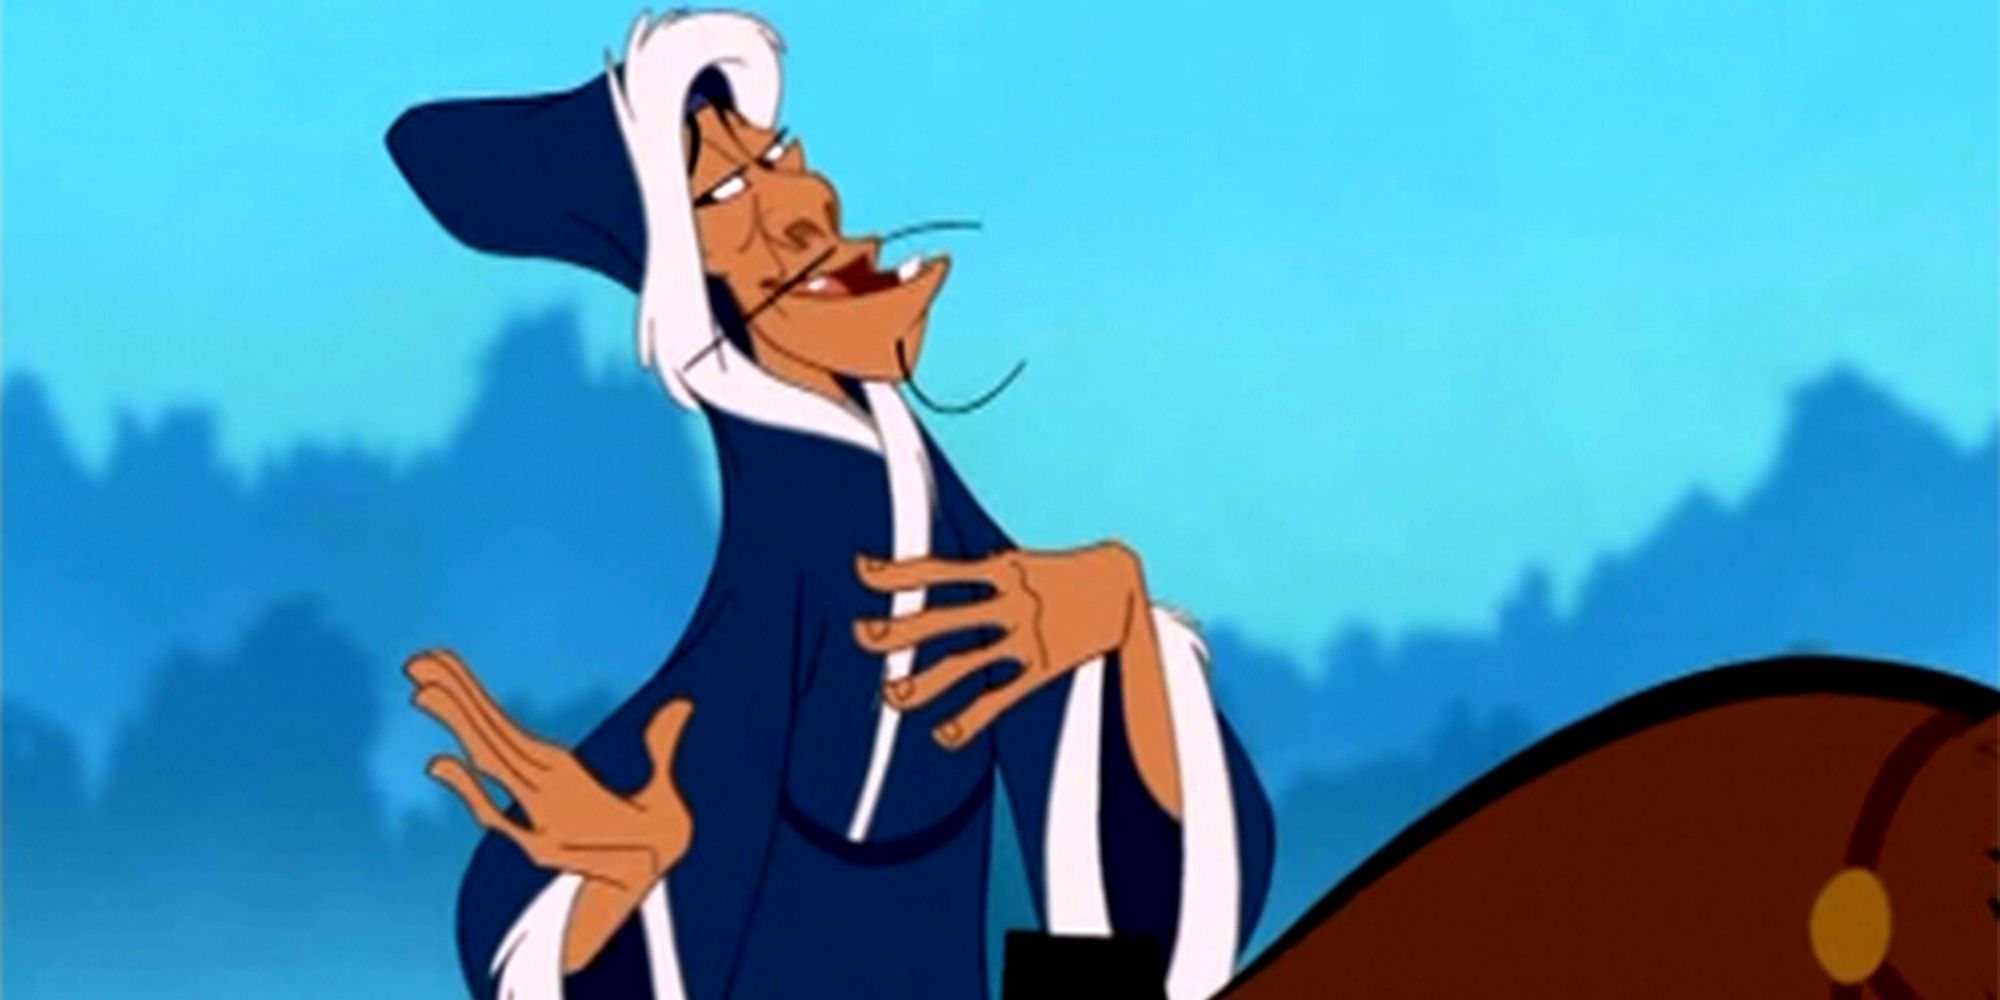 james hong in mulan as chi-fu sings as he rides a horse in a robe